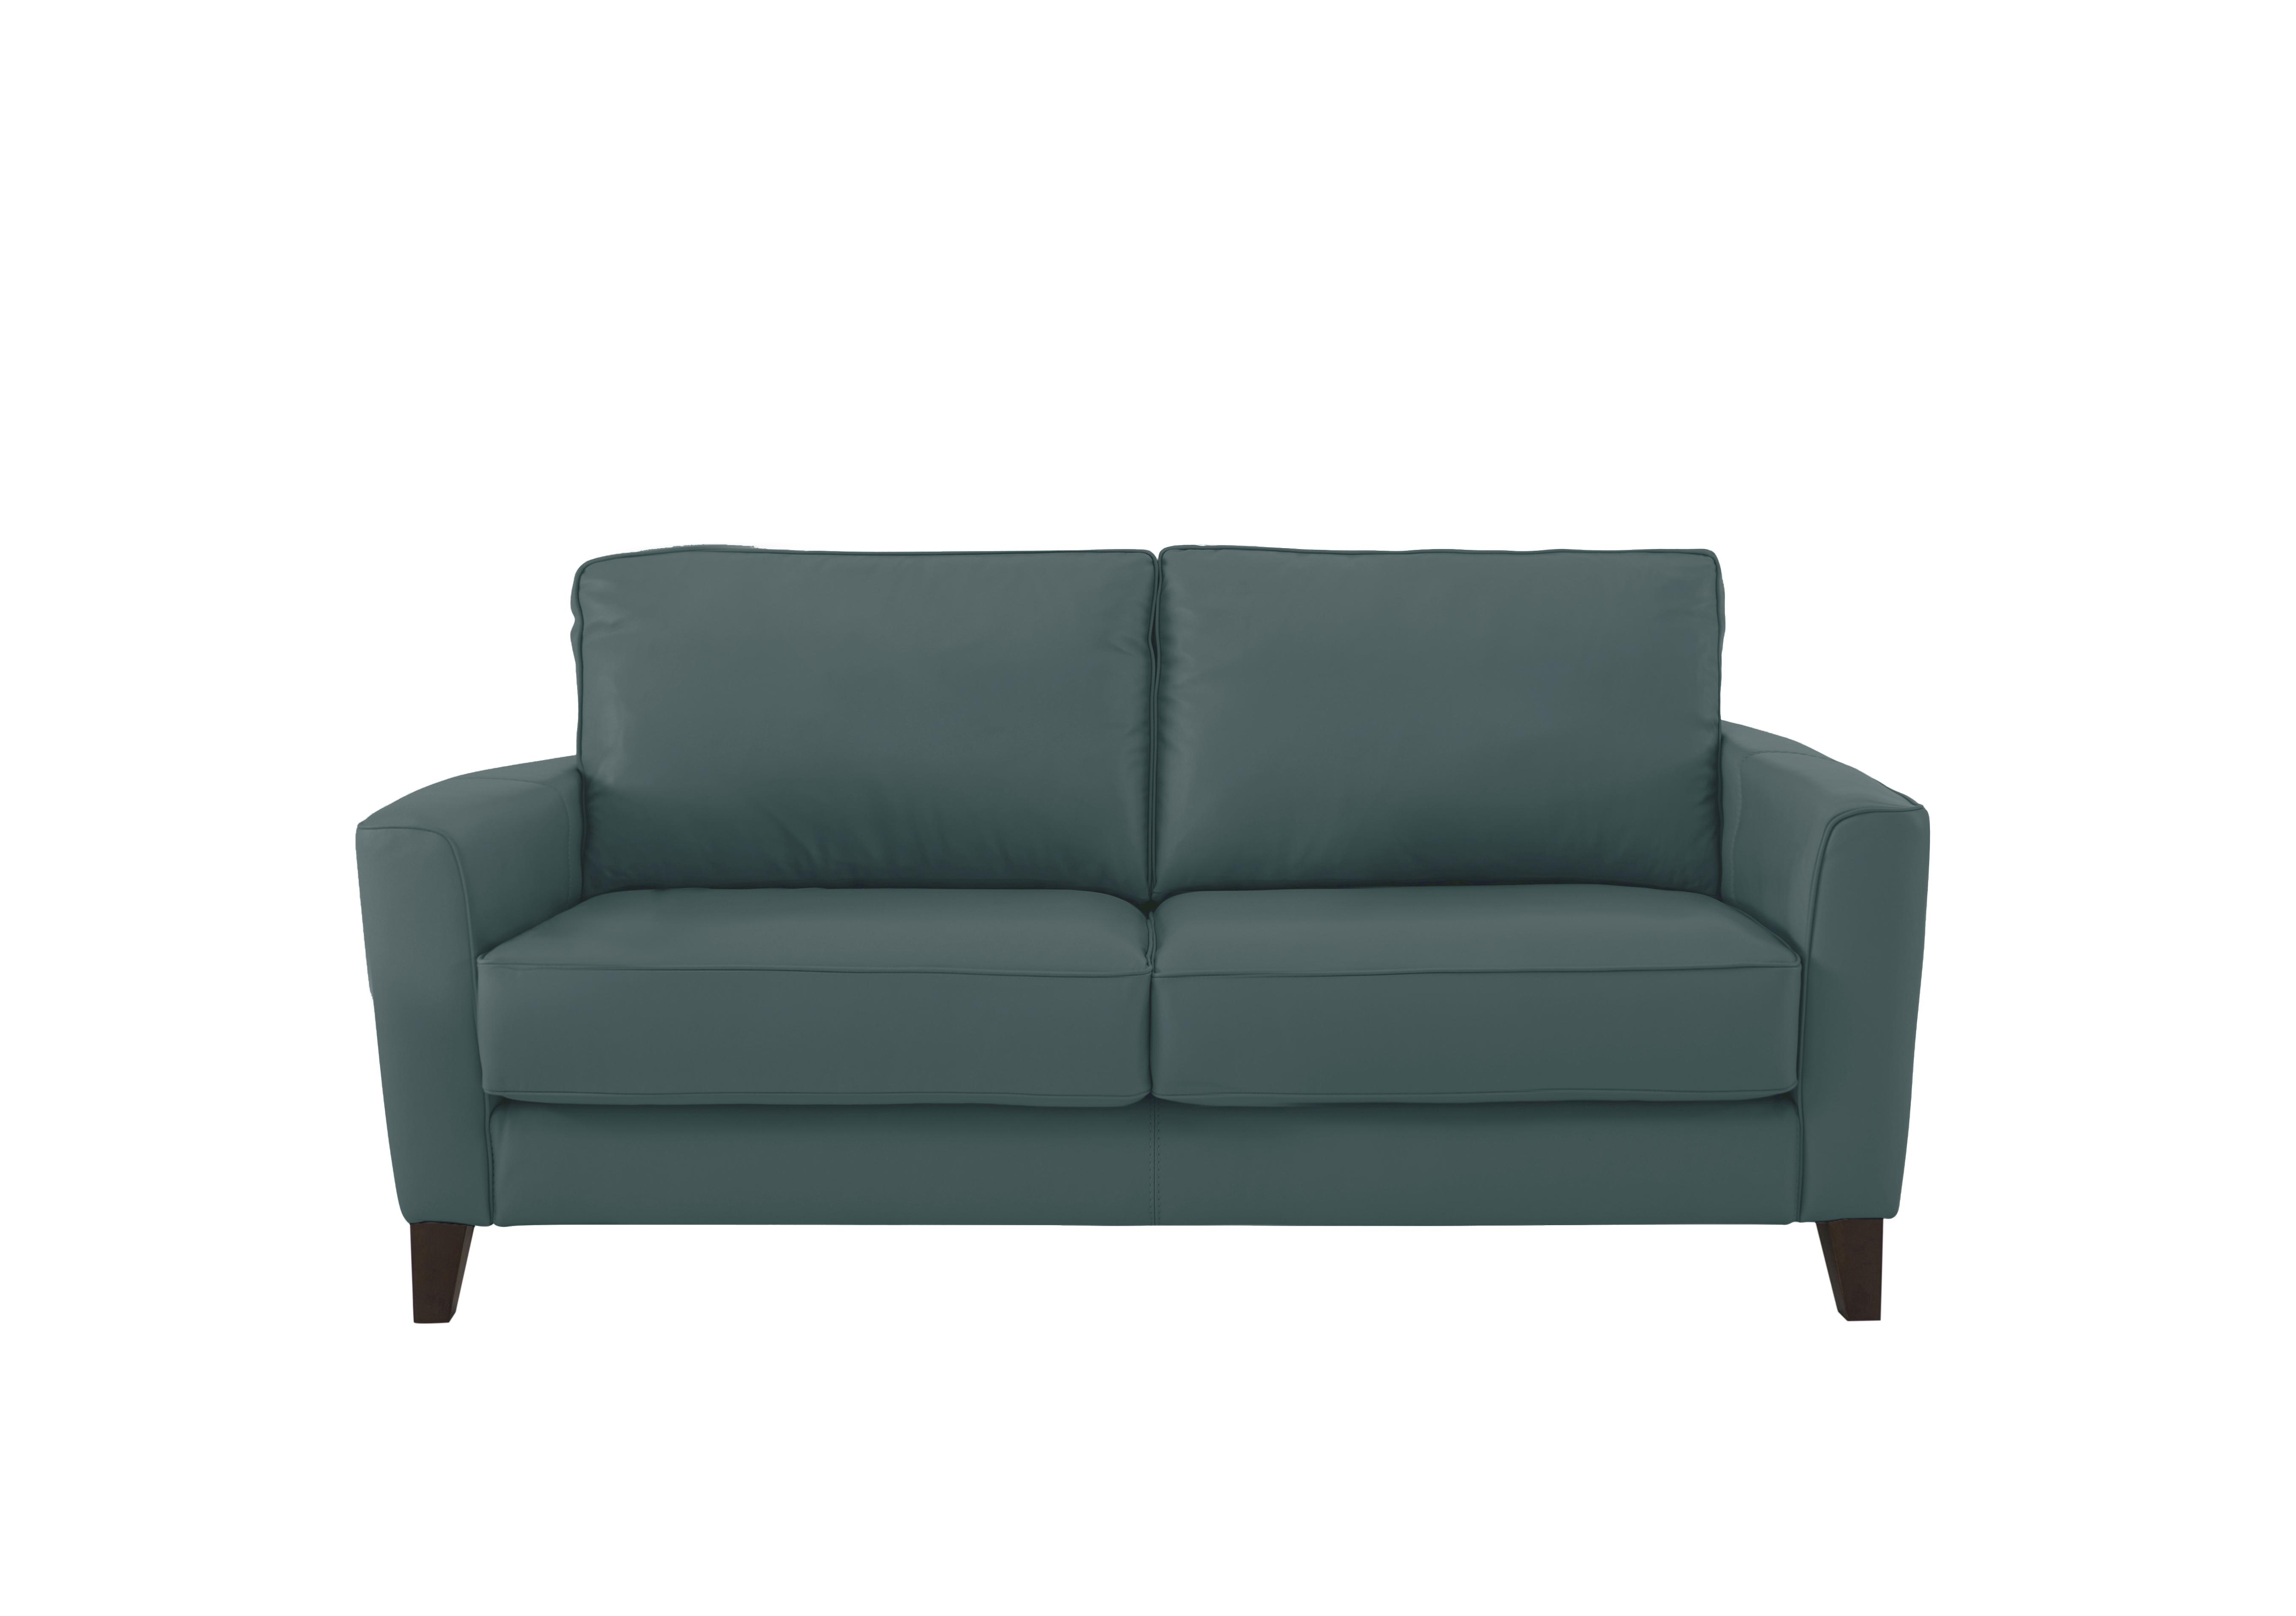 Brondby 2 Seater Leather Sofa in Bv-301e Lake Green on Furniture Village